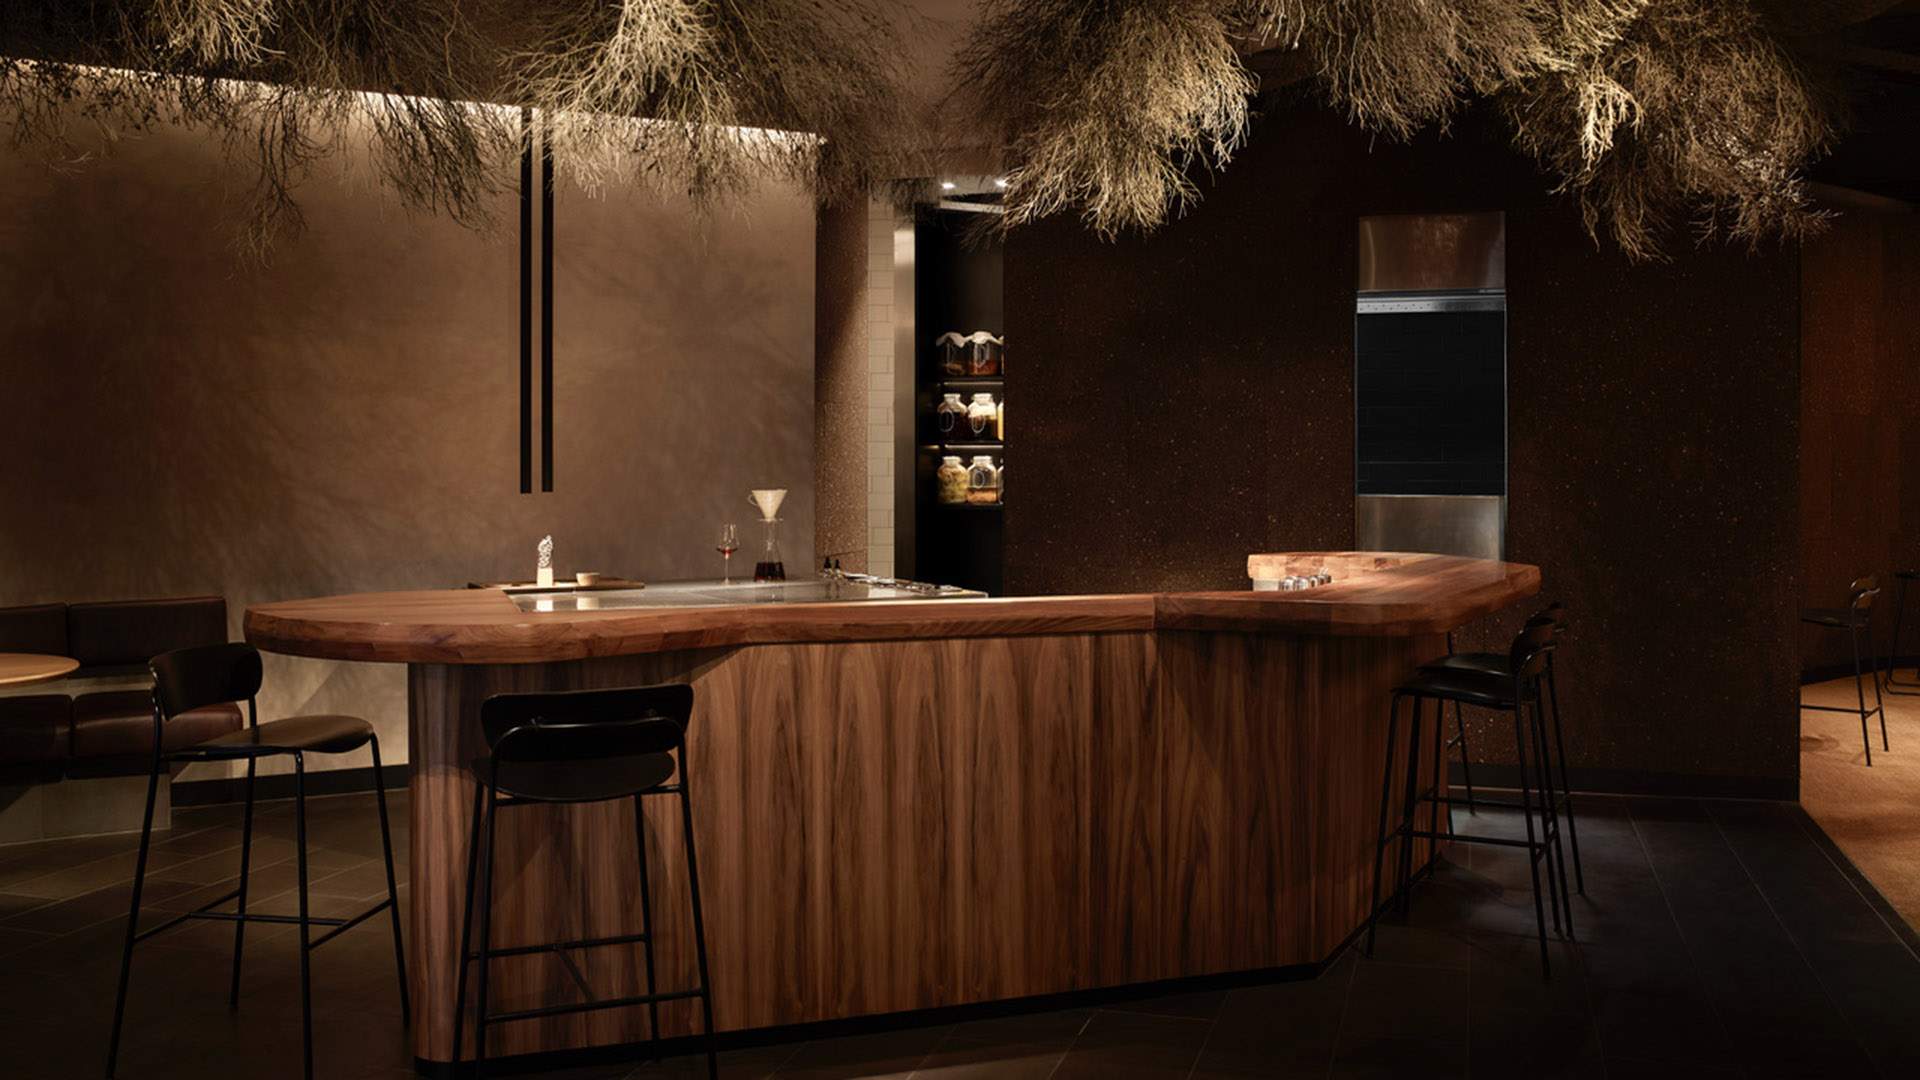 Melbourne Cocktail Favourite Byrdi Has Been Named in The World's 50 Best Bars 51-100 List for 2023